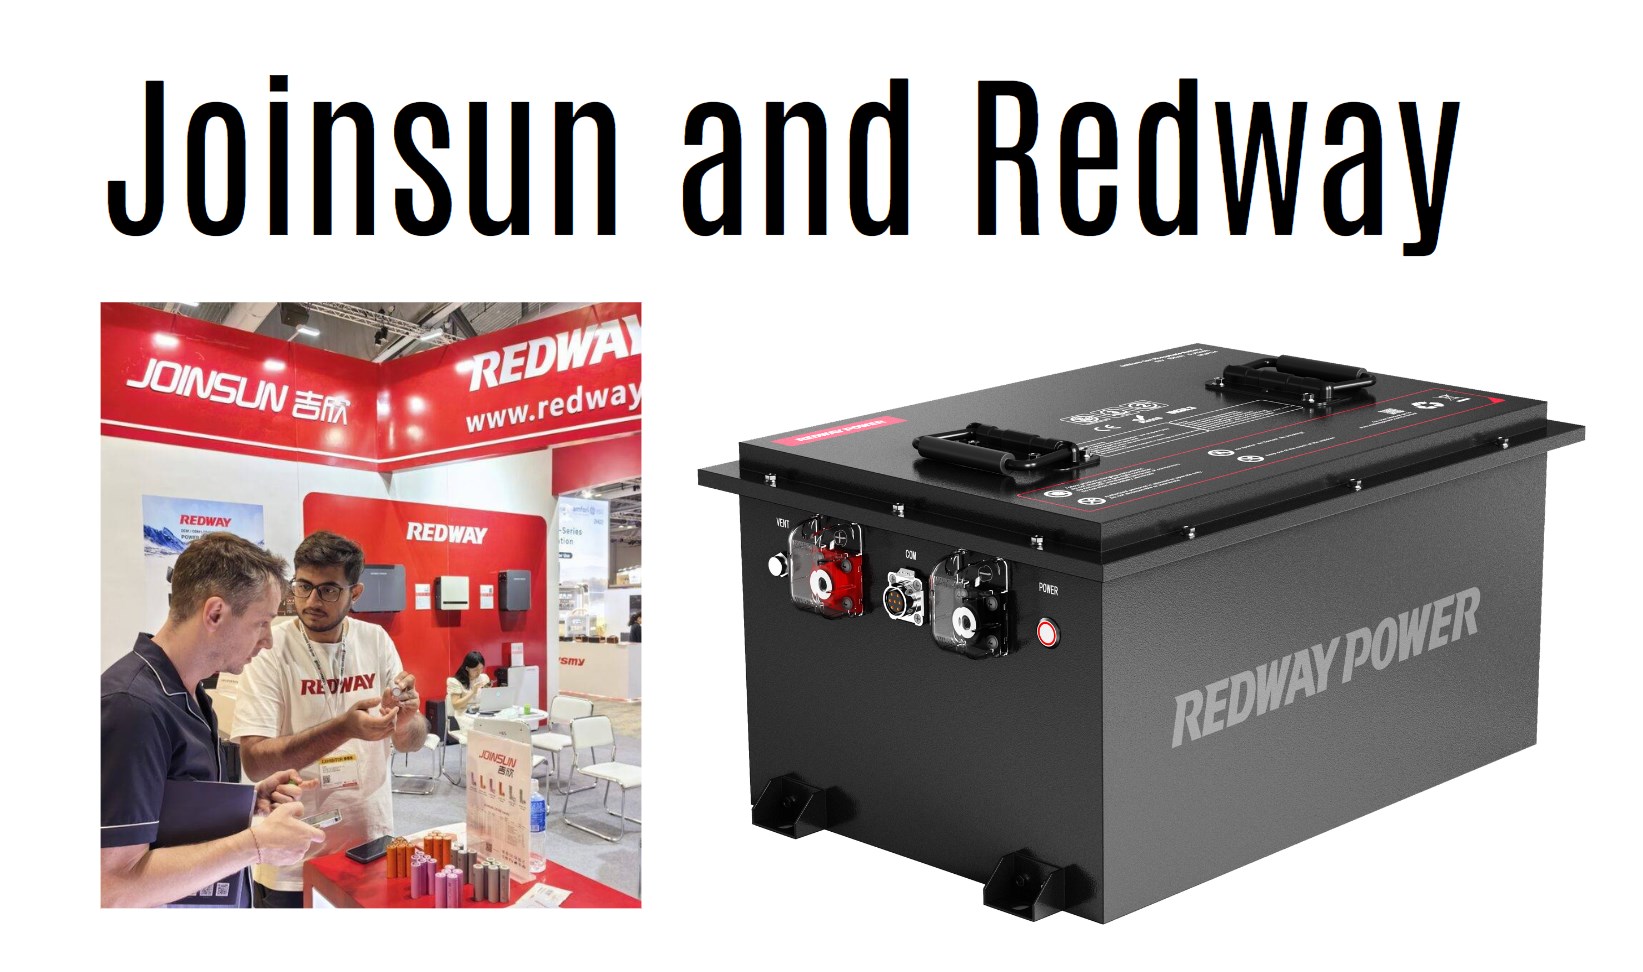 Joinsun and Redway